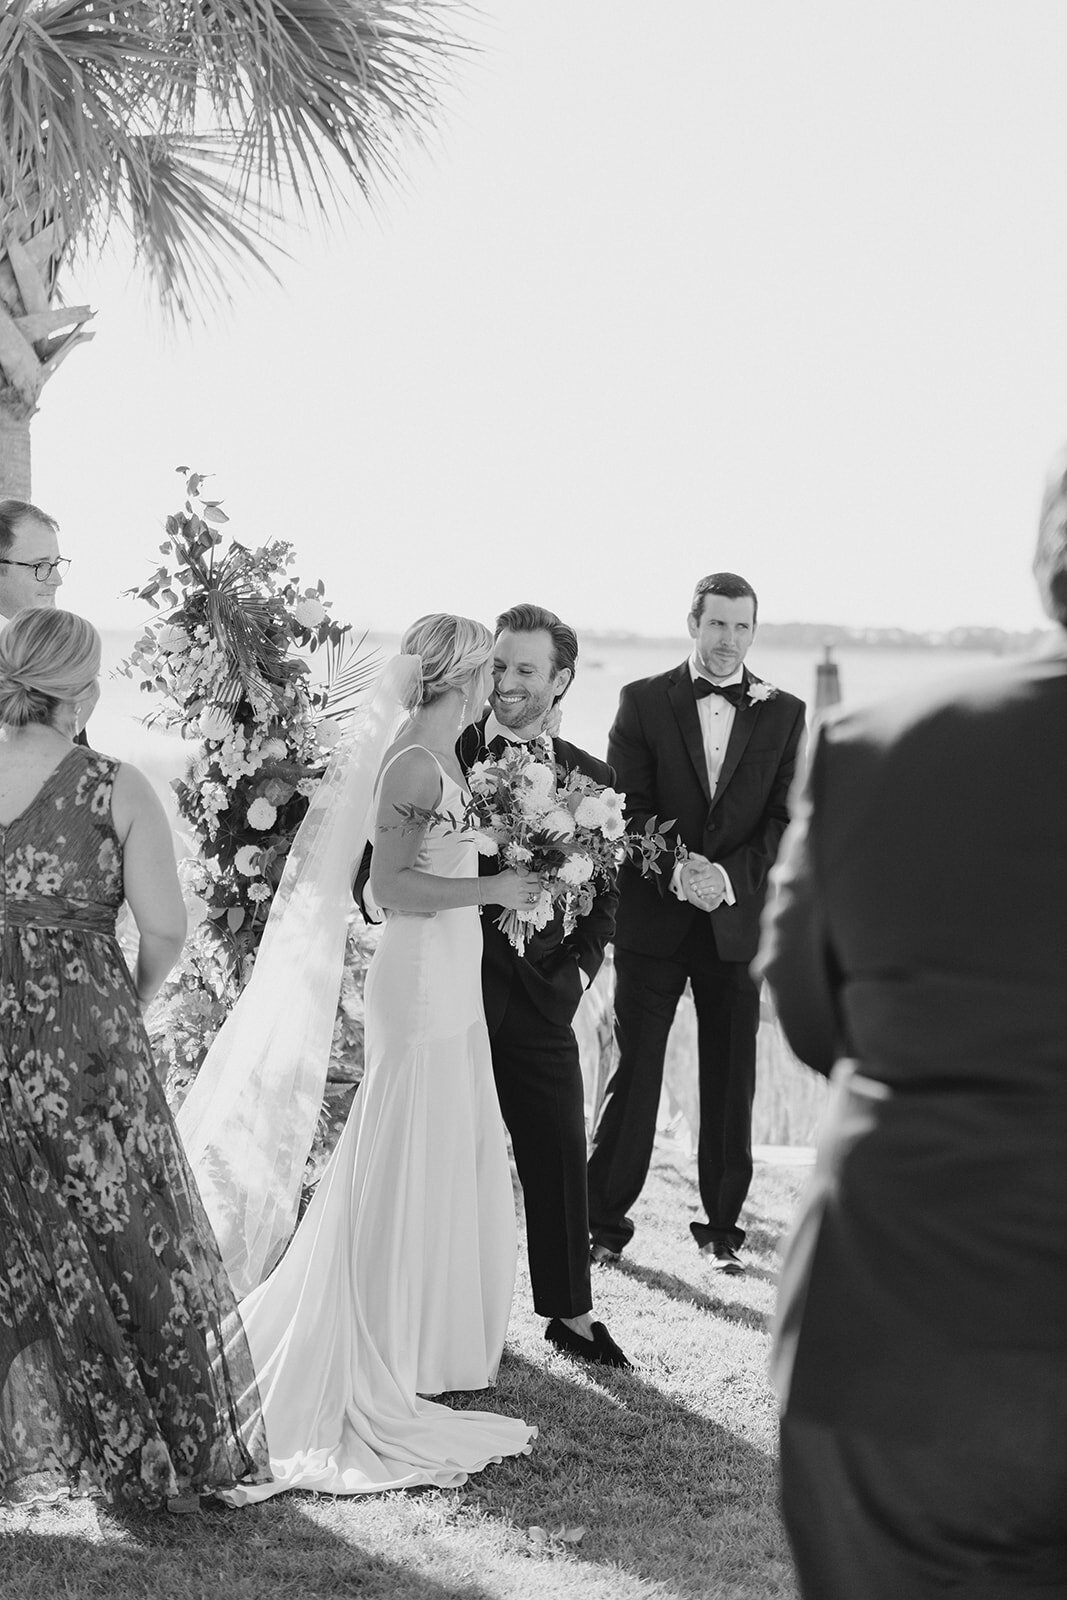 Waterfront wedding ceremony at Charleston fall wedding. Bride and groom smile after the first kiss. Palm tree and sunshine. Black and white wedding photos. Kailee DiMeglio Photography.